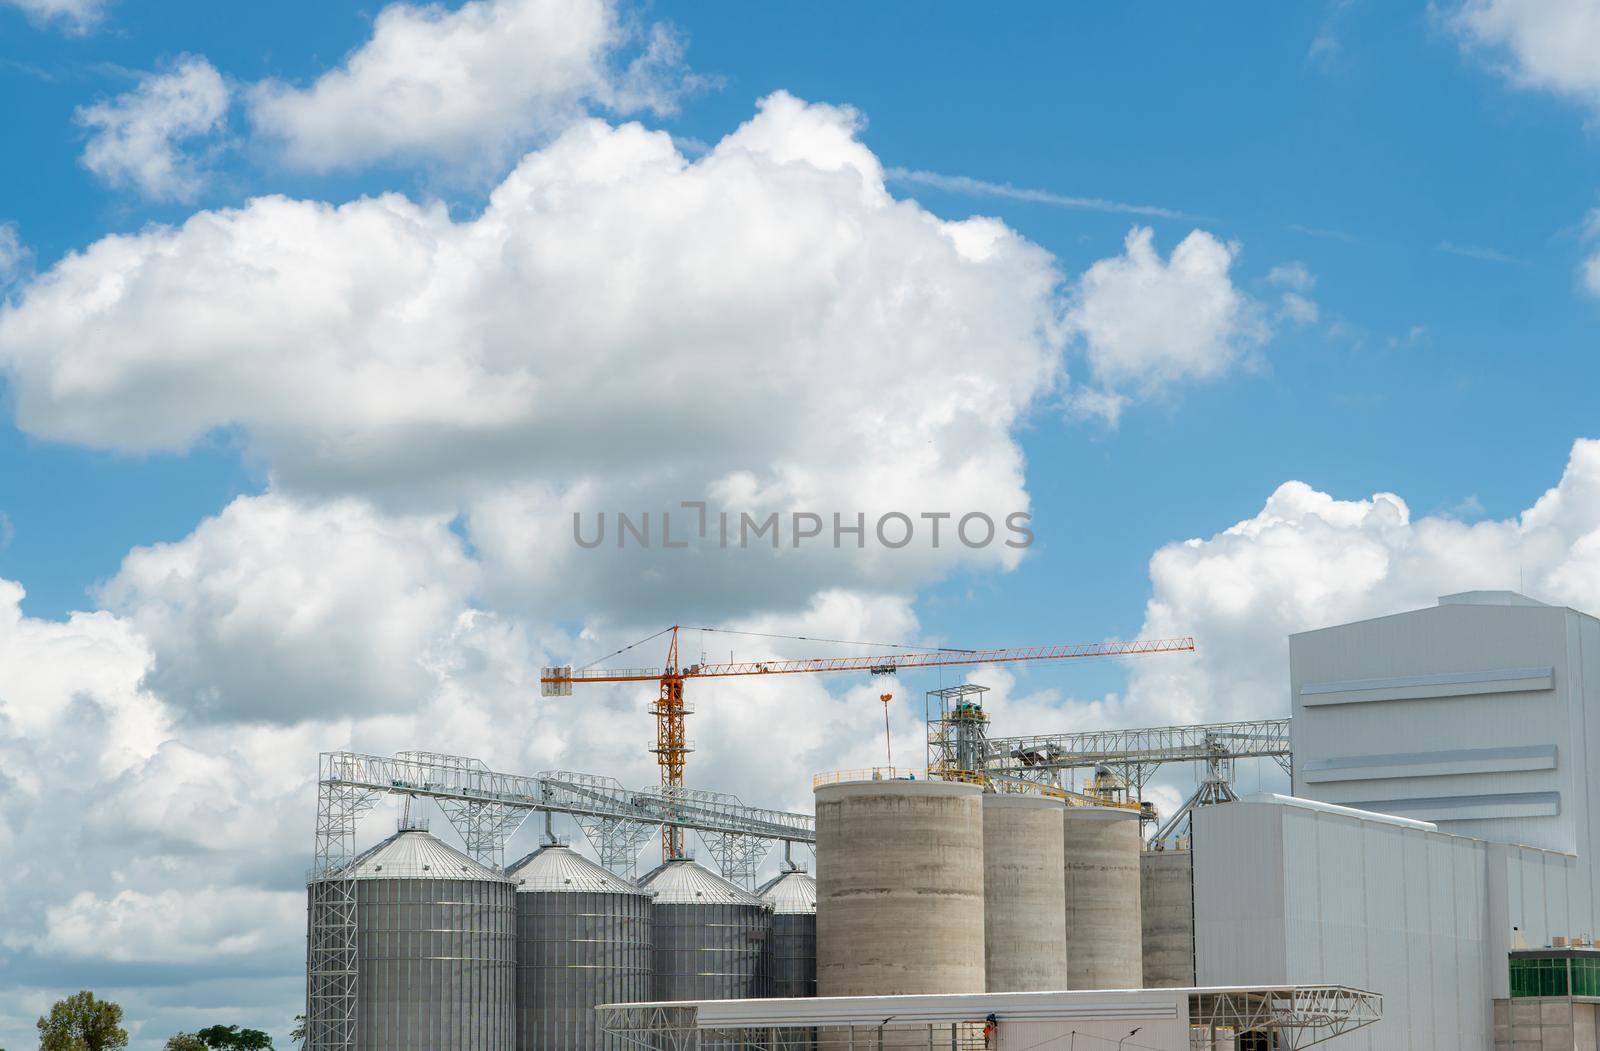 Animal feed factory construction site. Agricultural silo at feed mill factory. Tank for store grain and construction crane. Seed stock tower for commercial animal feed production. Animal food industry